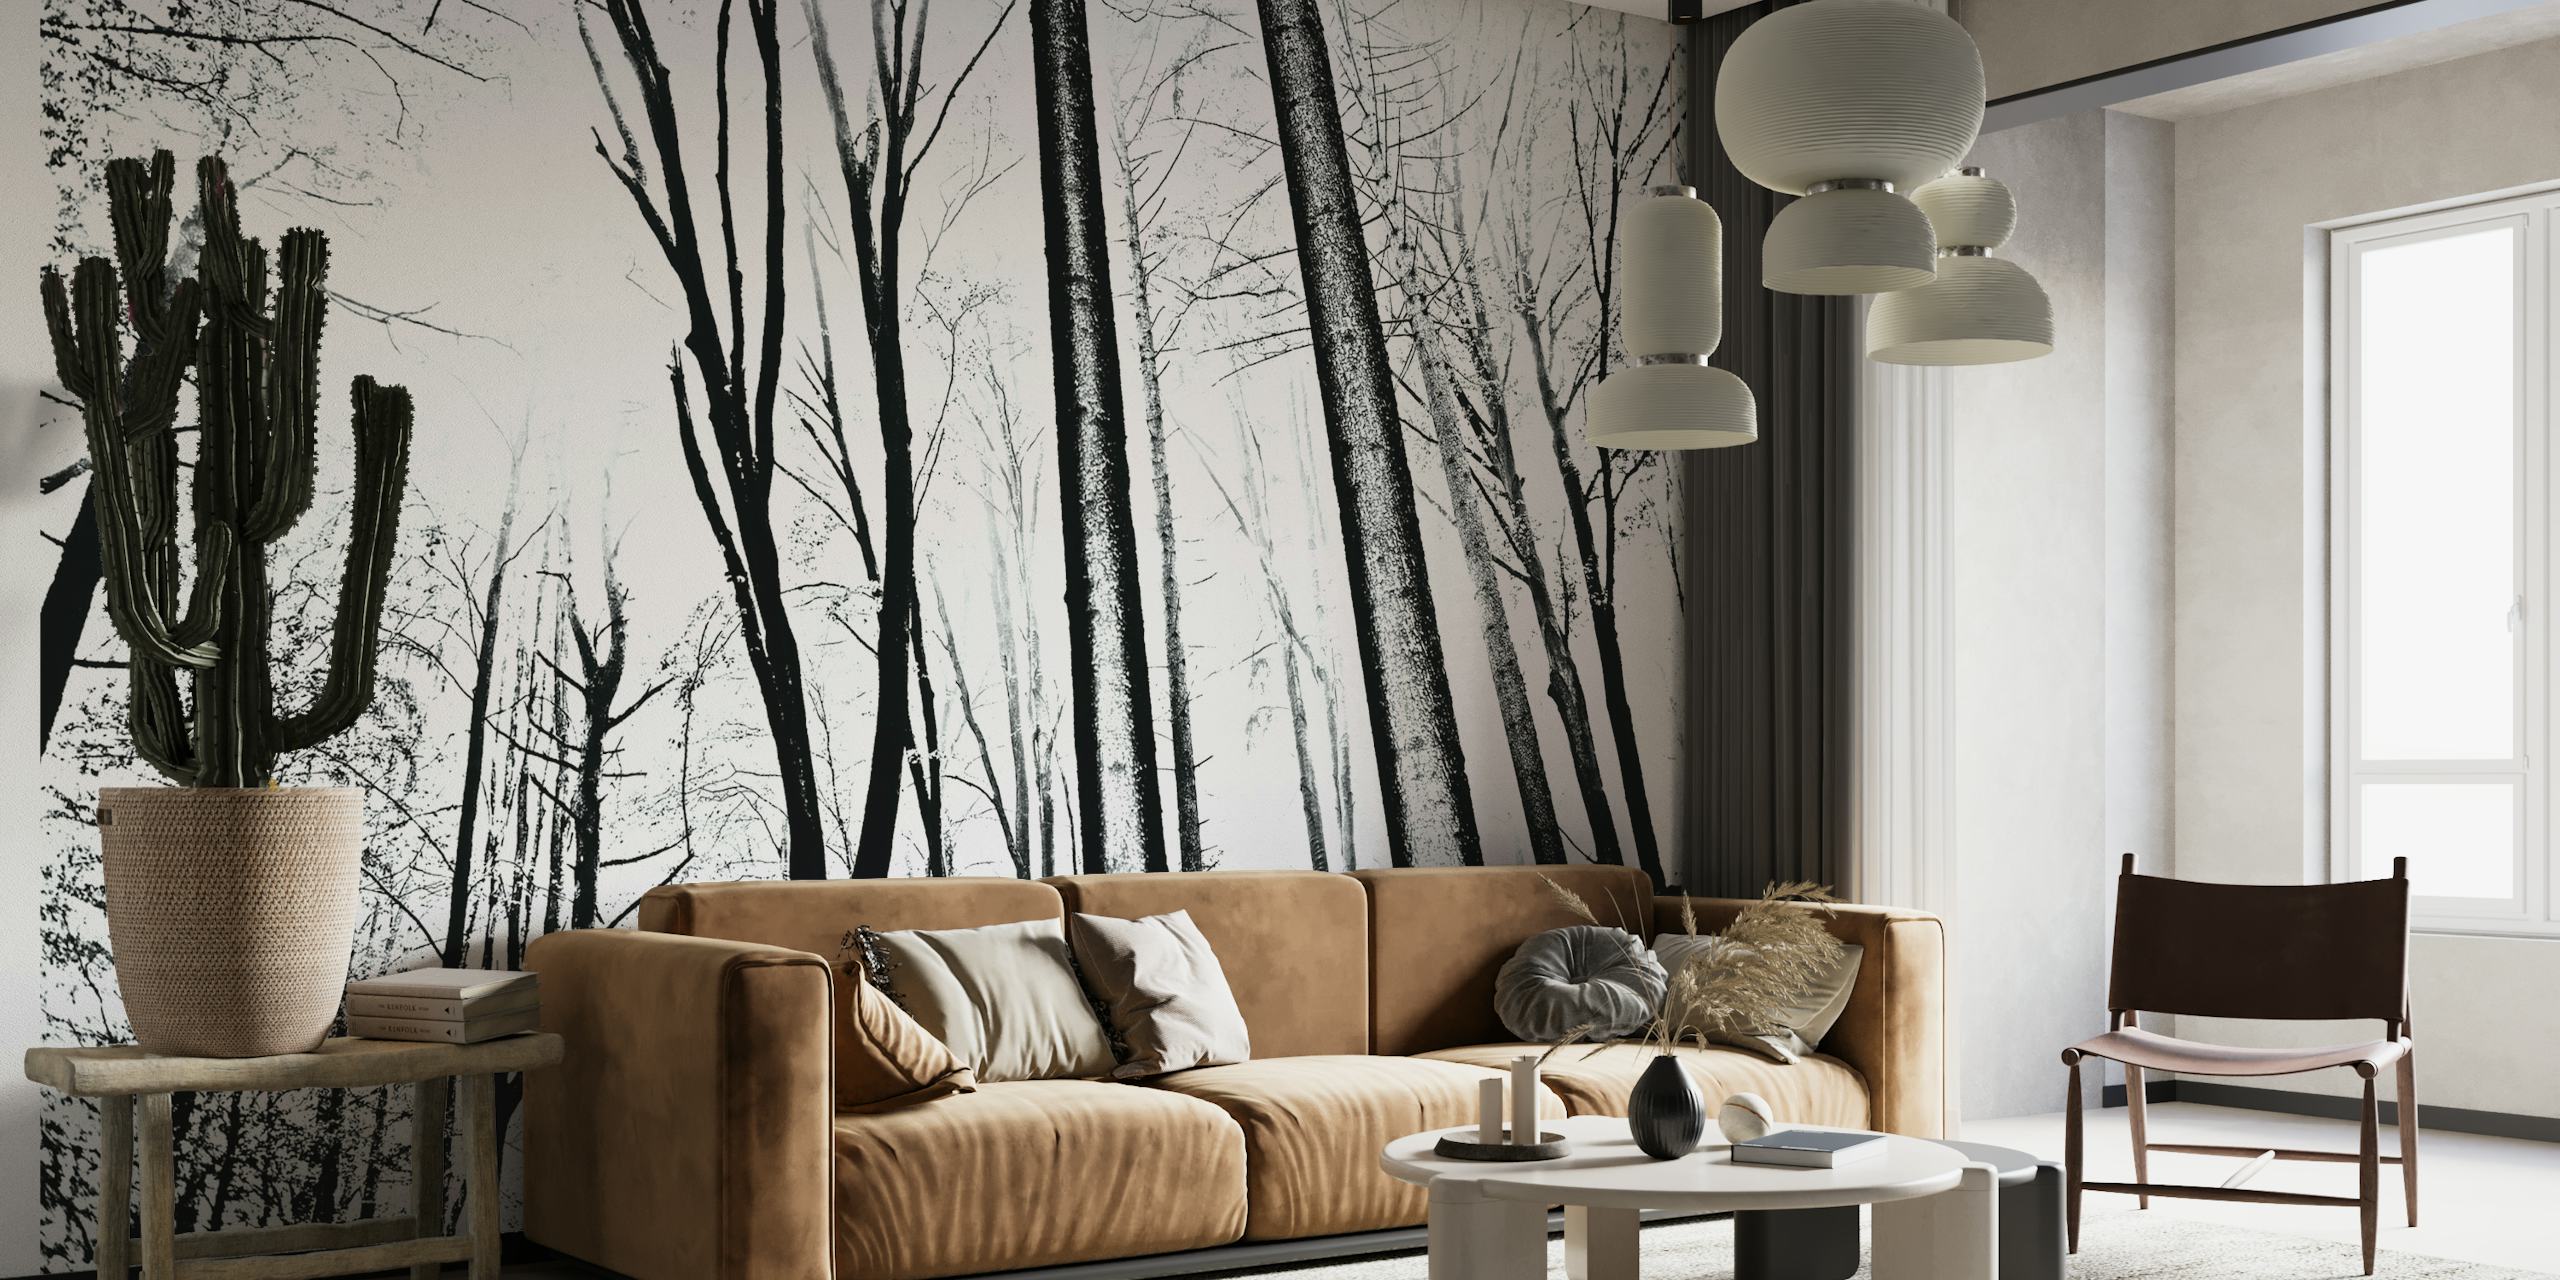 Monochrome Forest: Black and White Forest Wall Mural Wallpaper